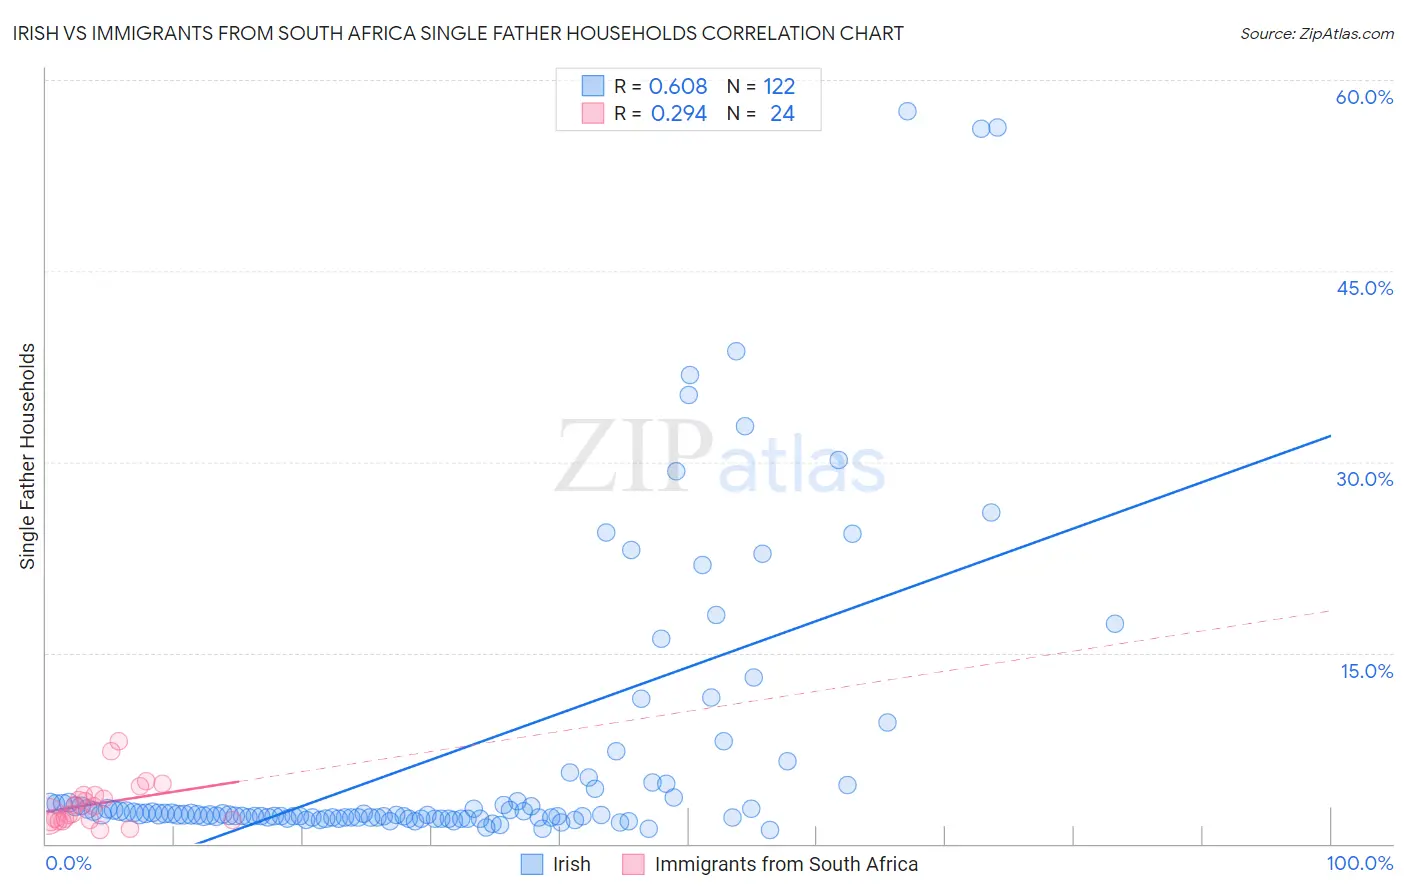 Irish vs Immigrants from South Africa Single Father Households